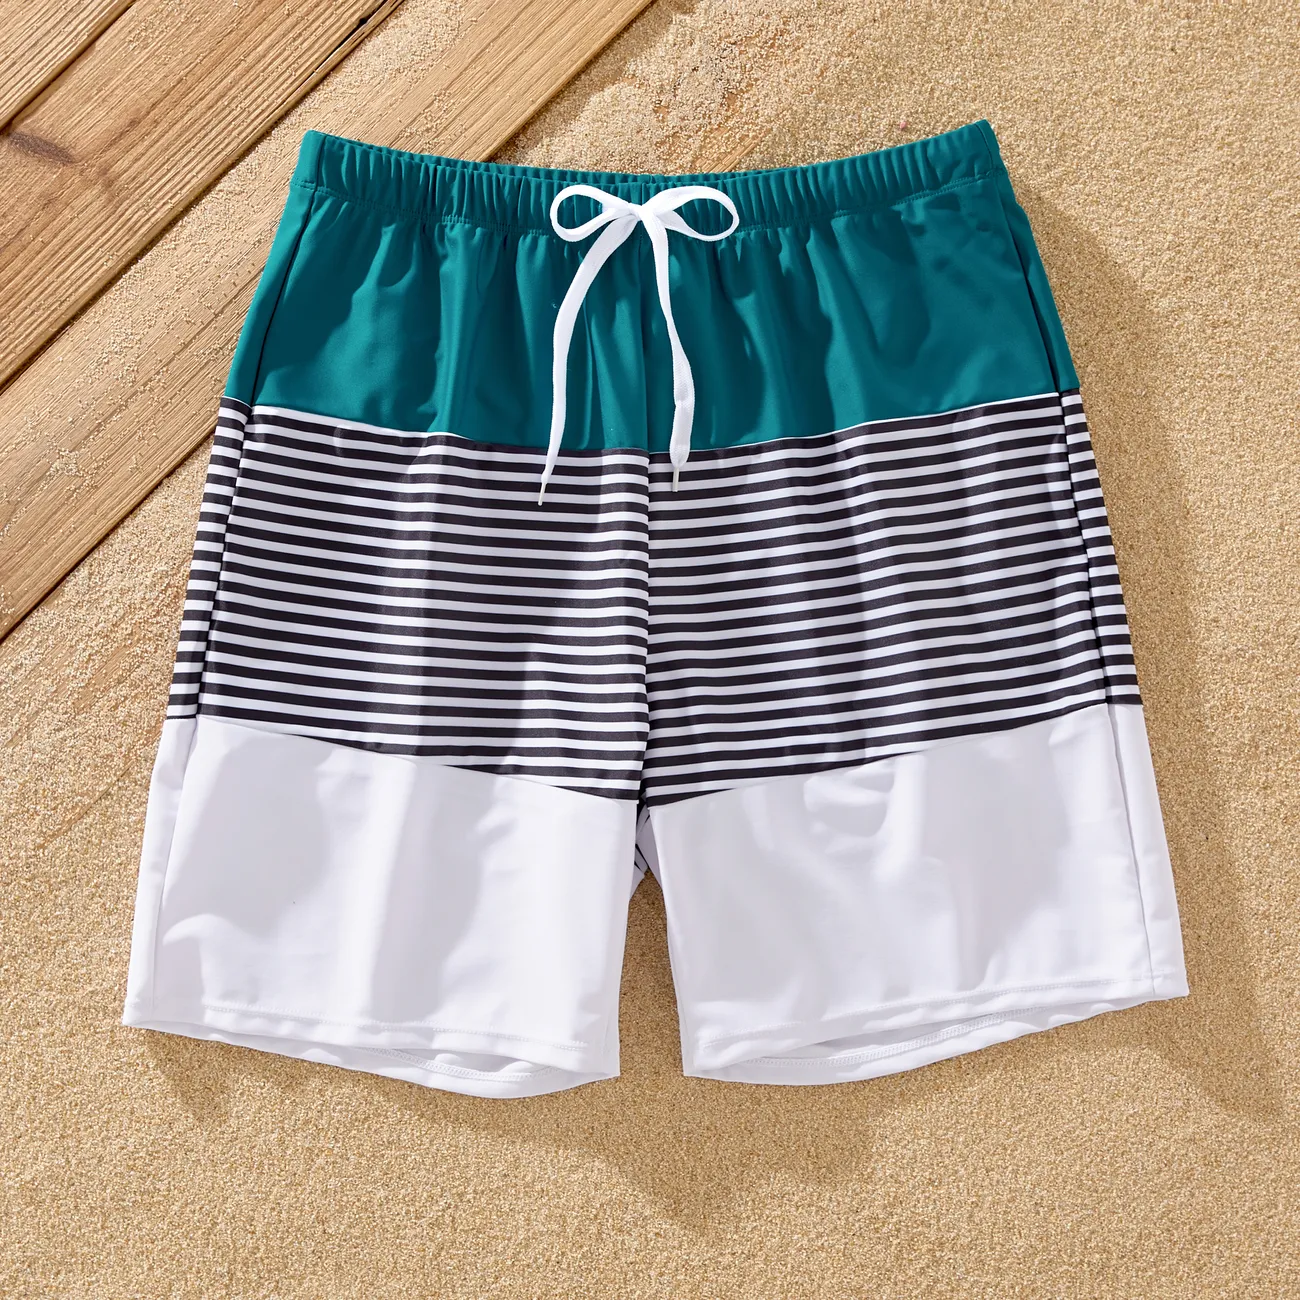 Family Matching Colorblock One Shoulder Cut Out One-piece Swimsuit and Striped Spliced Swim Trunks Shorts DeepTurquoise big image 1